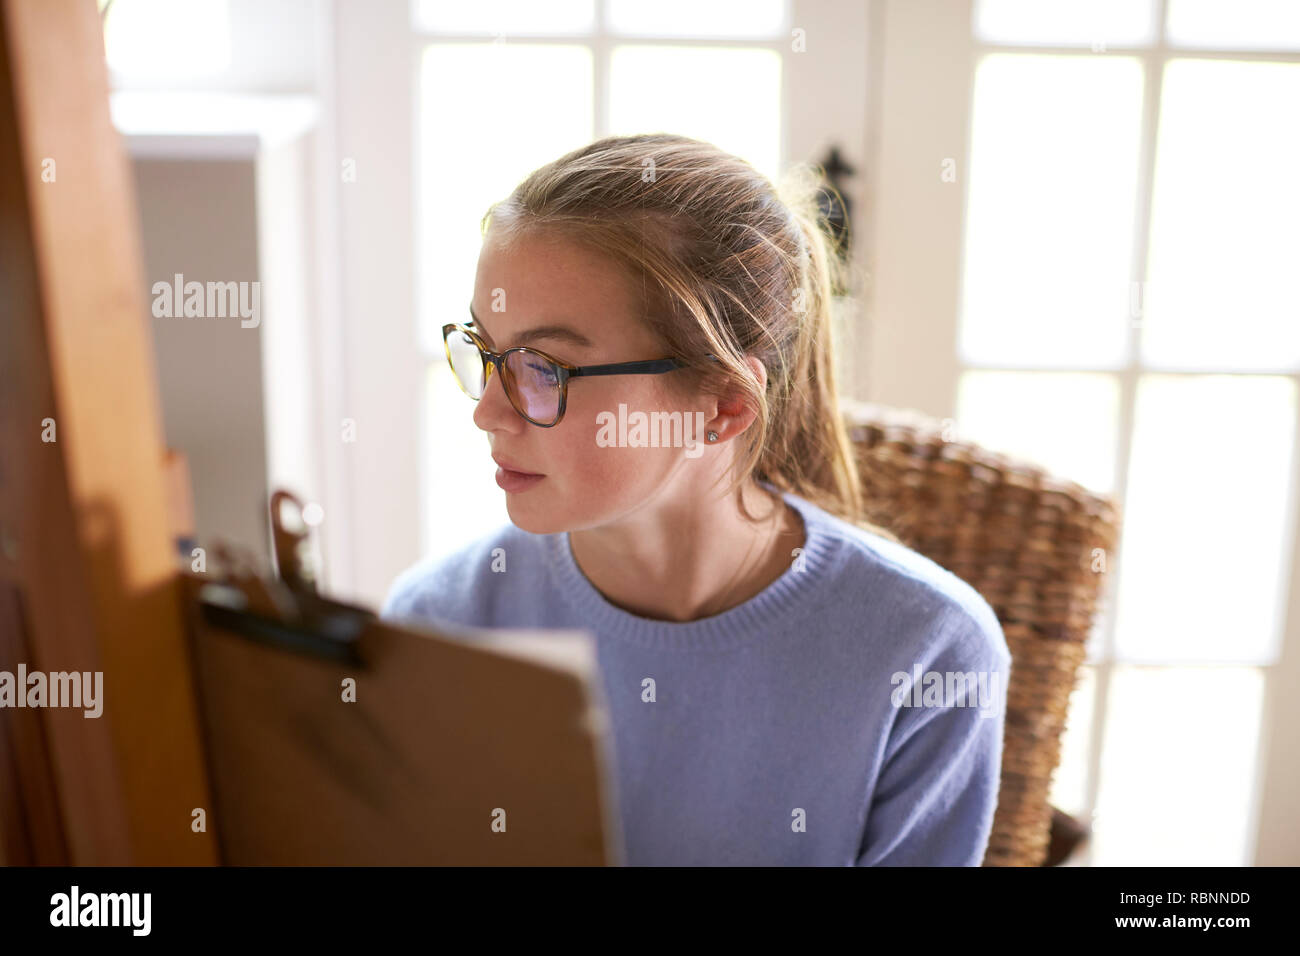 Close Up Of Female Teenage Artist Working Behind Easel Stock Photo